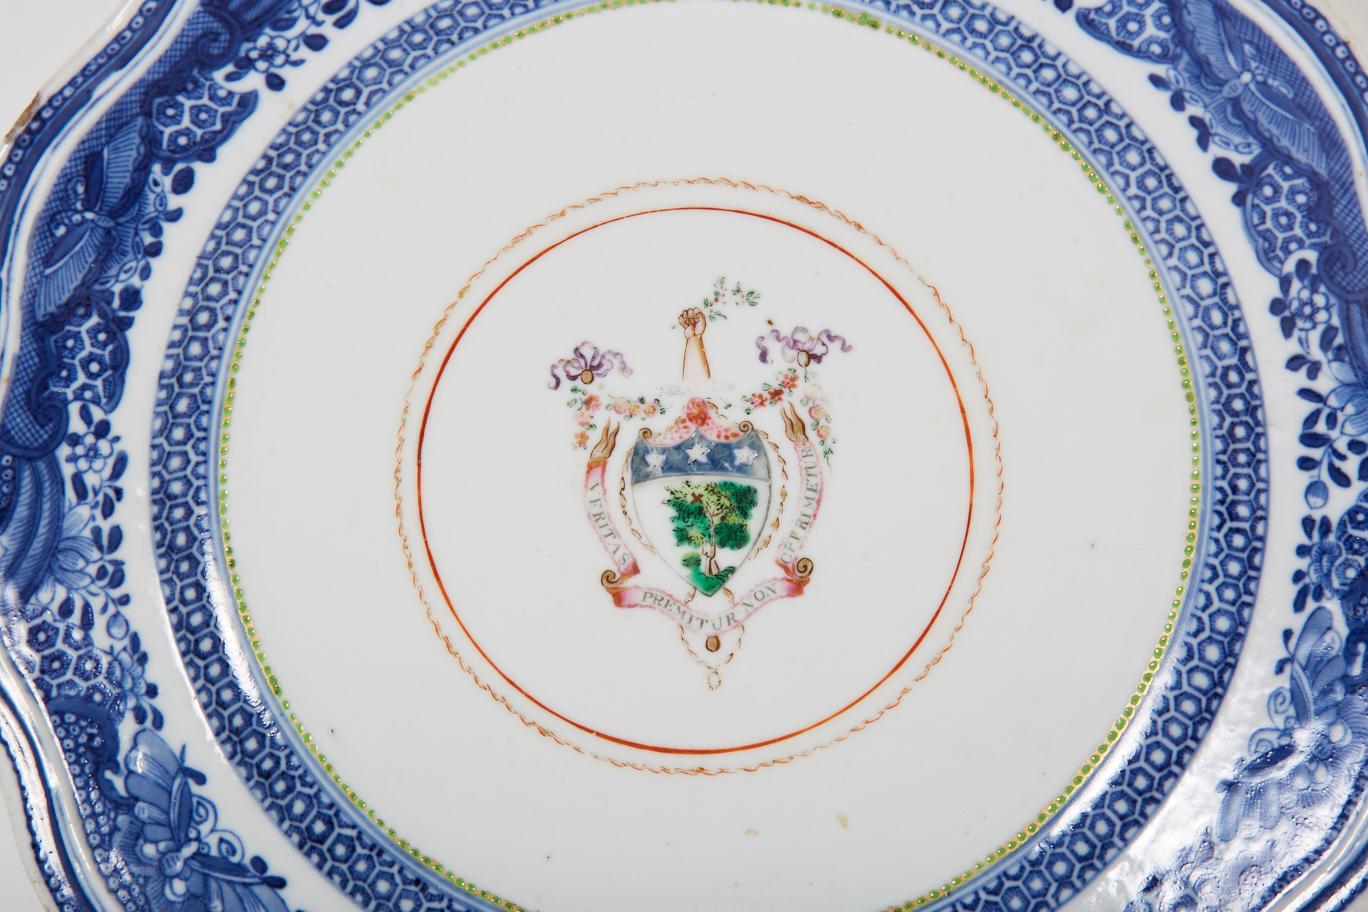 This Chinese export porcelain plate features a blue on white Fitzhugh style border surrounding an armorial containing the motto 